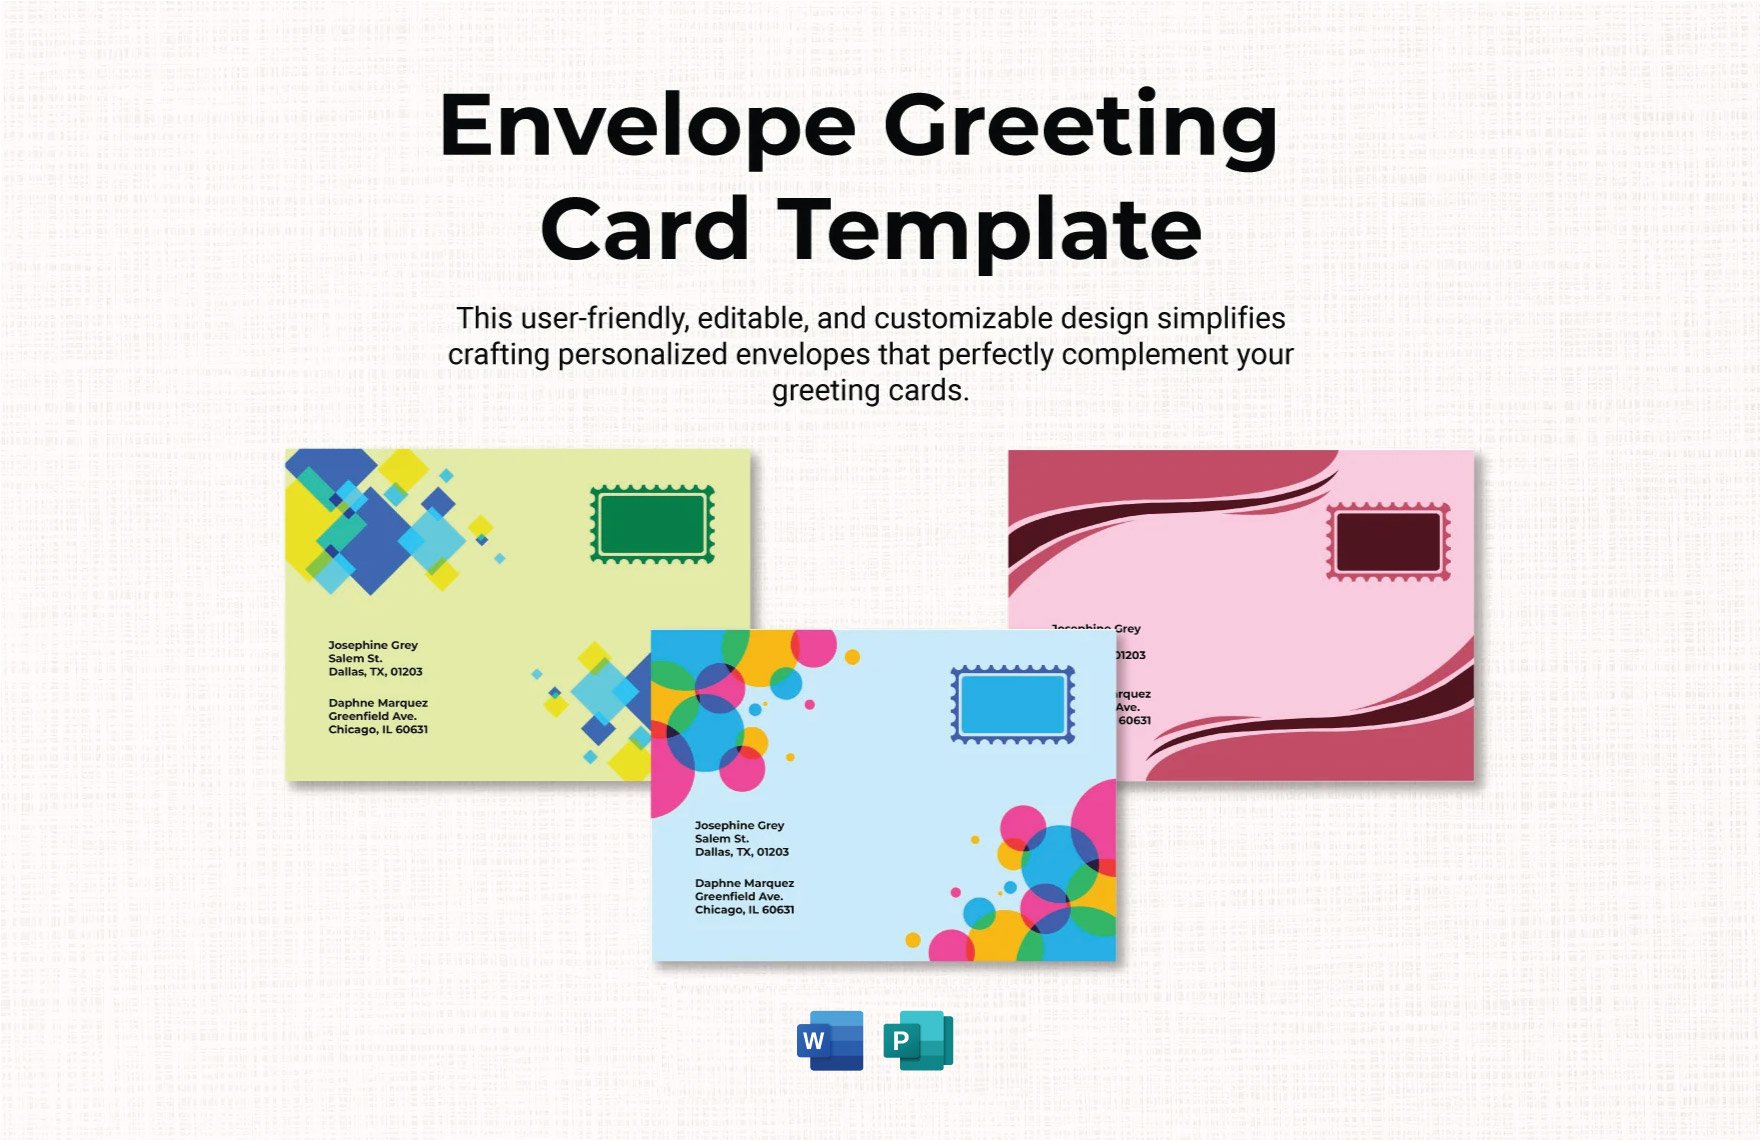 Envelope Greeting Card Template in Word, Publisher